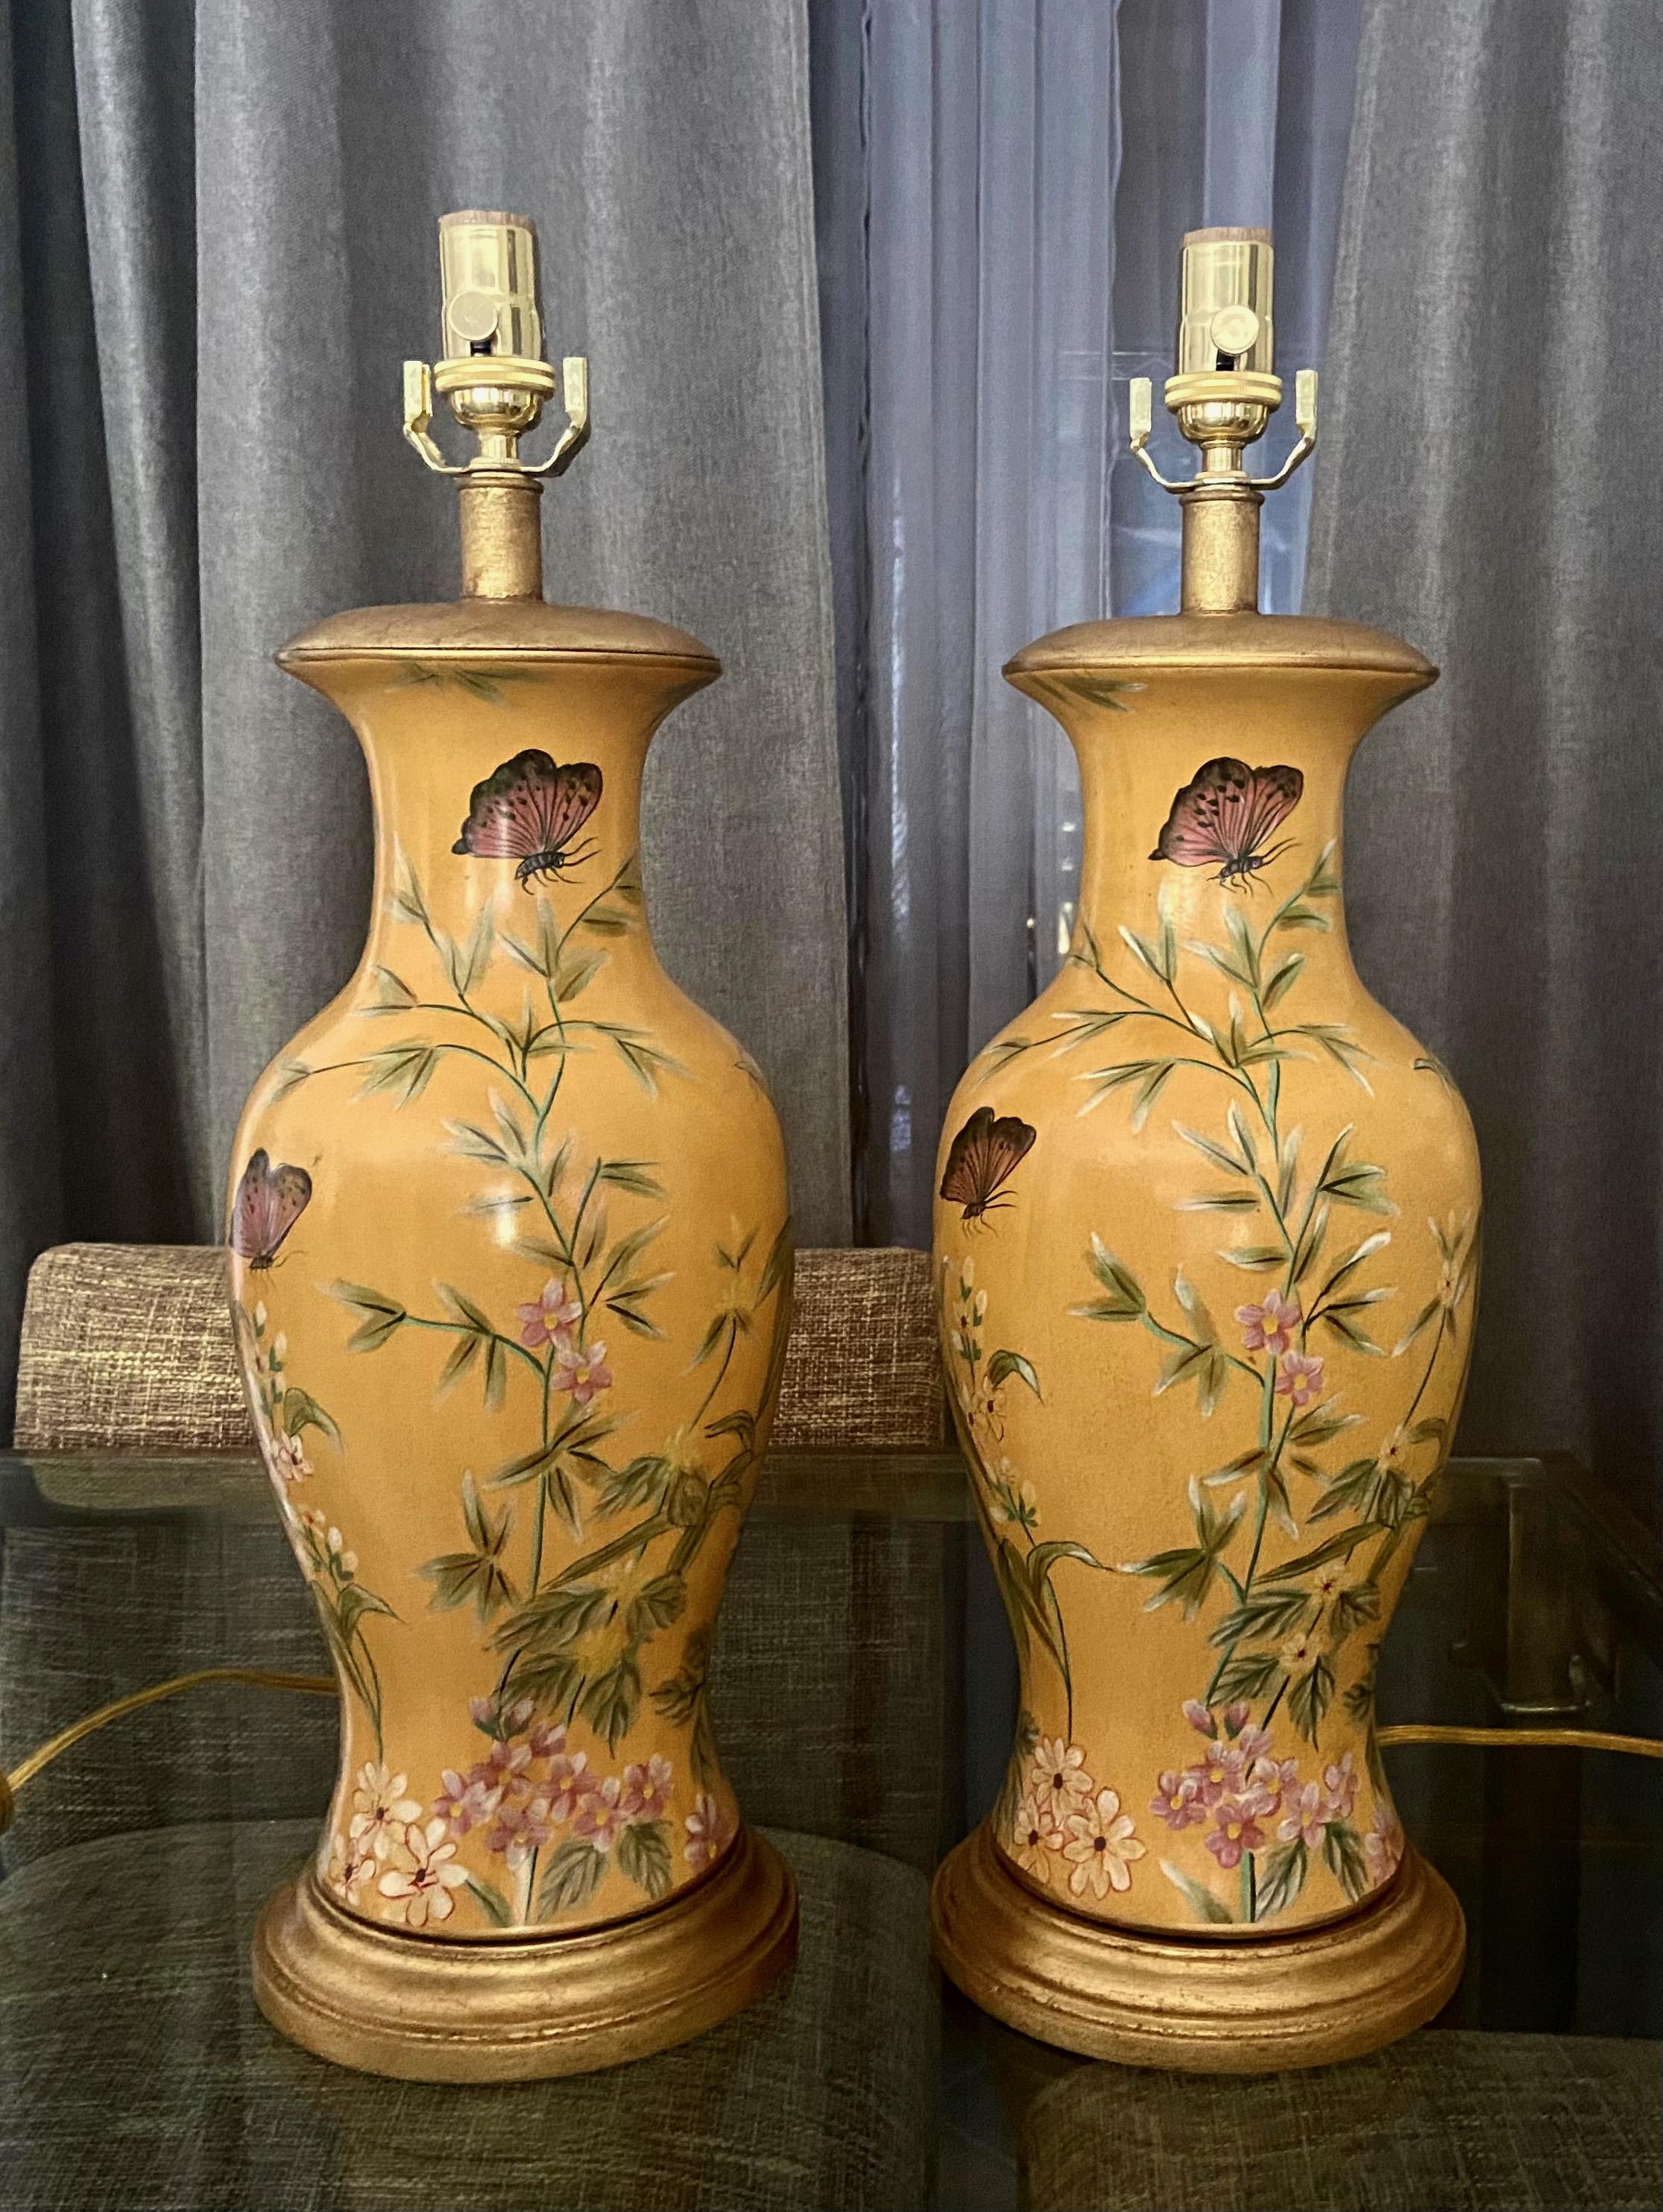 Pair of muster yellow baluster form ceramic table lamps with giltwood bases and vase caps. Nicely decorated with painted butterfly and bamboo leaf motif. Produced by Frederick Cooper. New 3 way brass sockets.
 